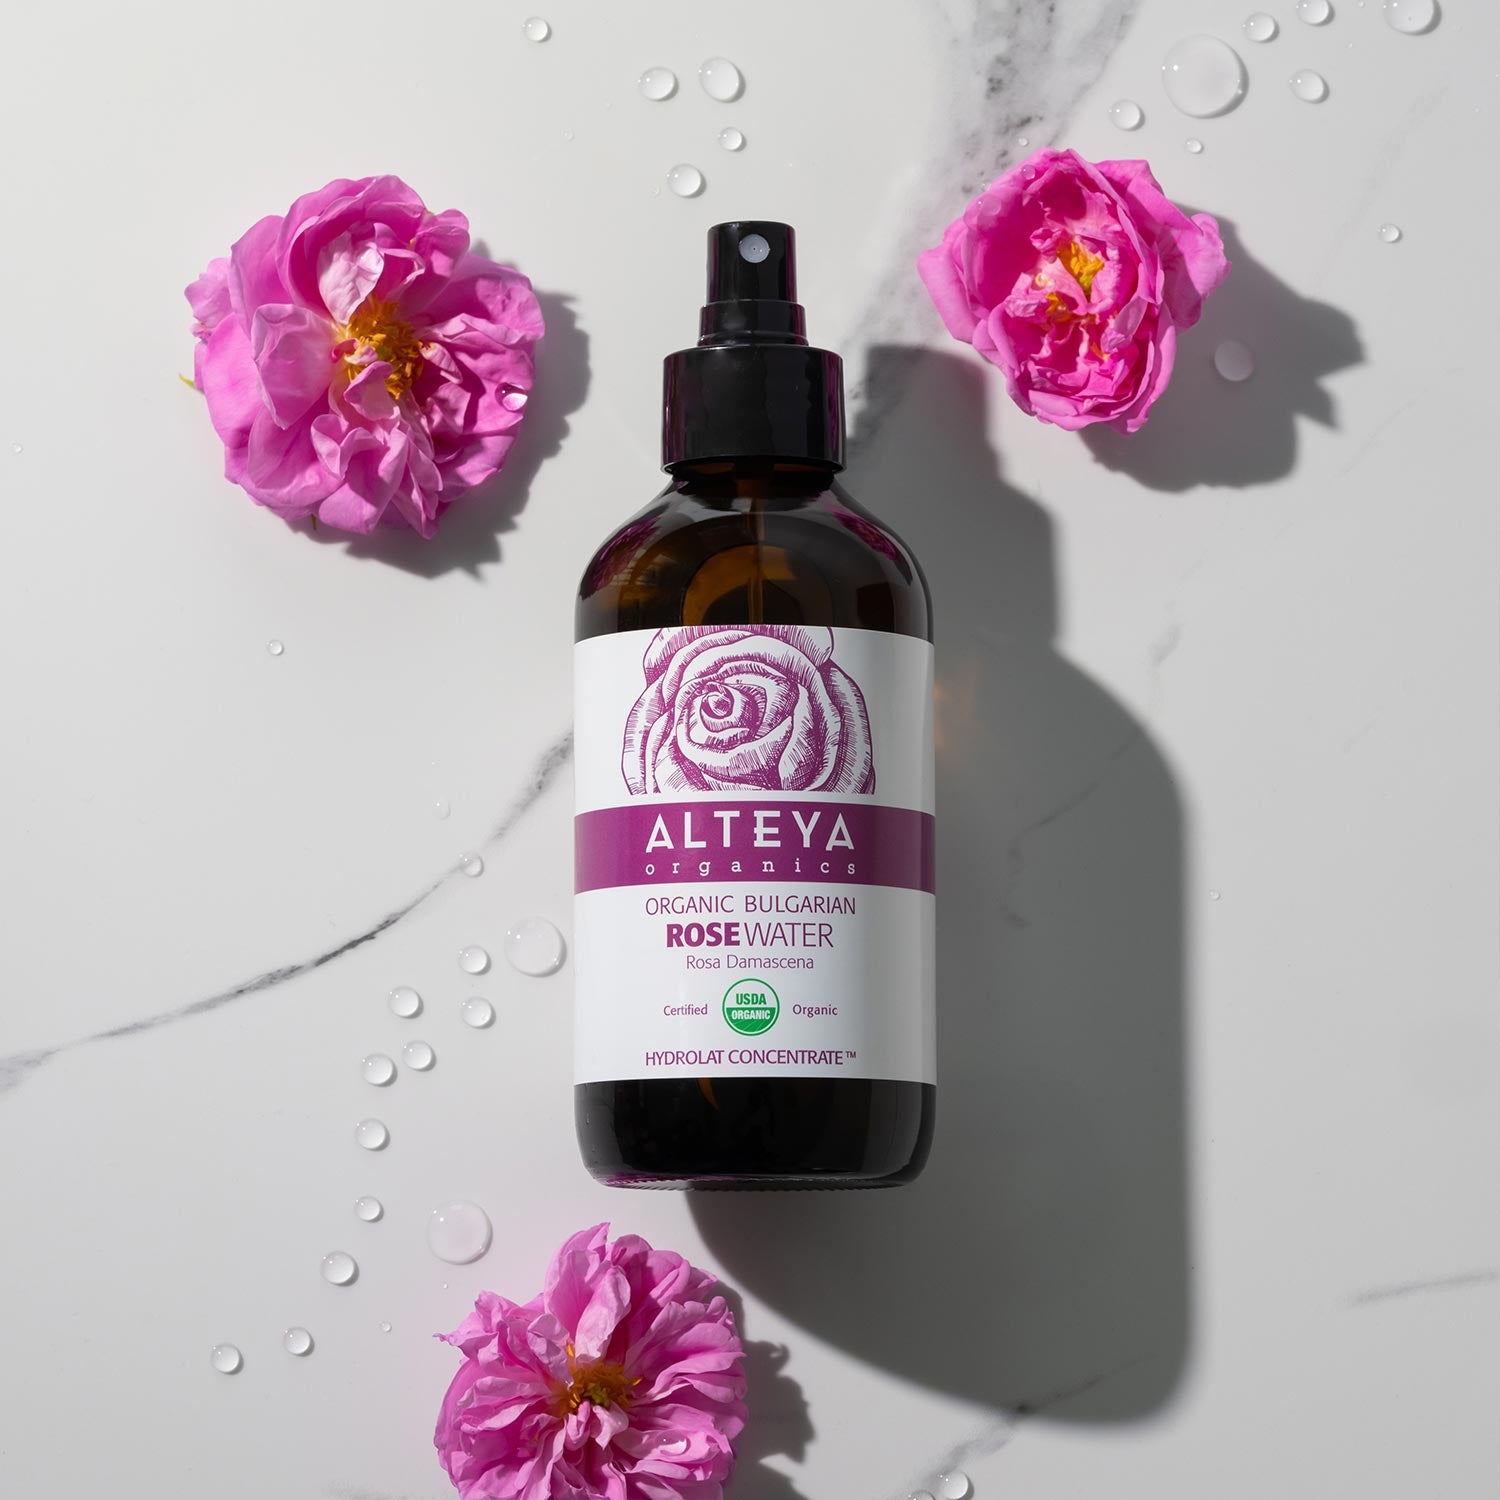 A bottle of Bulgarian Organic Rose Water – Glass Spray by Alteya Organics, known for its hydrating properties, surrounded by a bed of pink flowers.